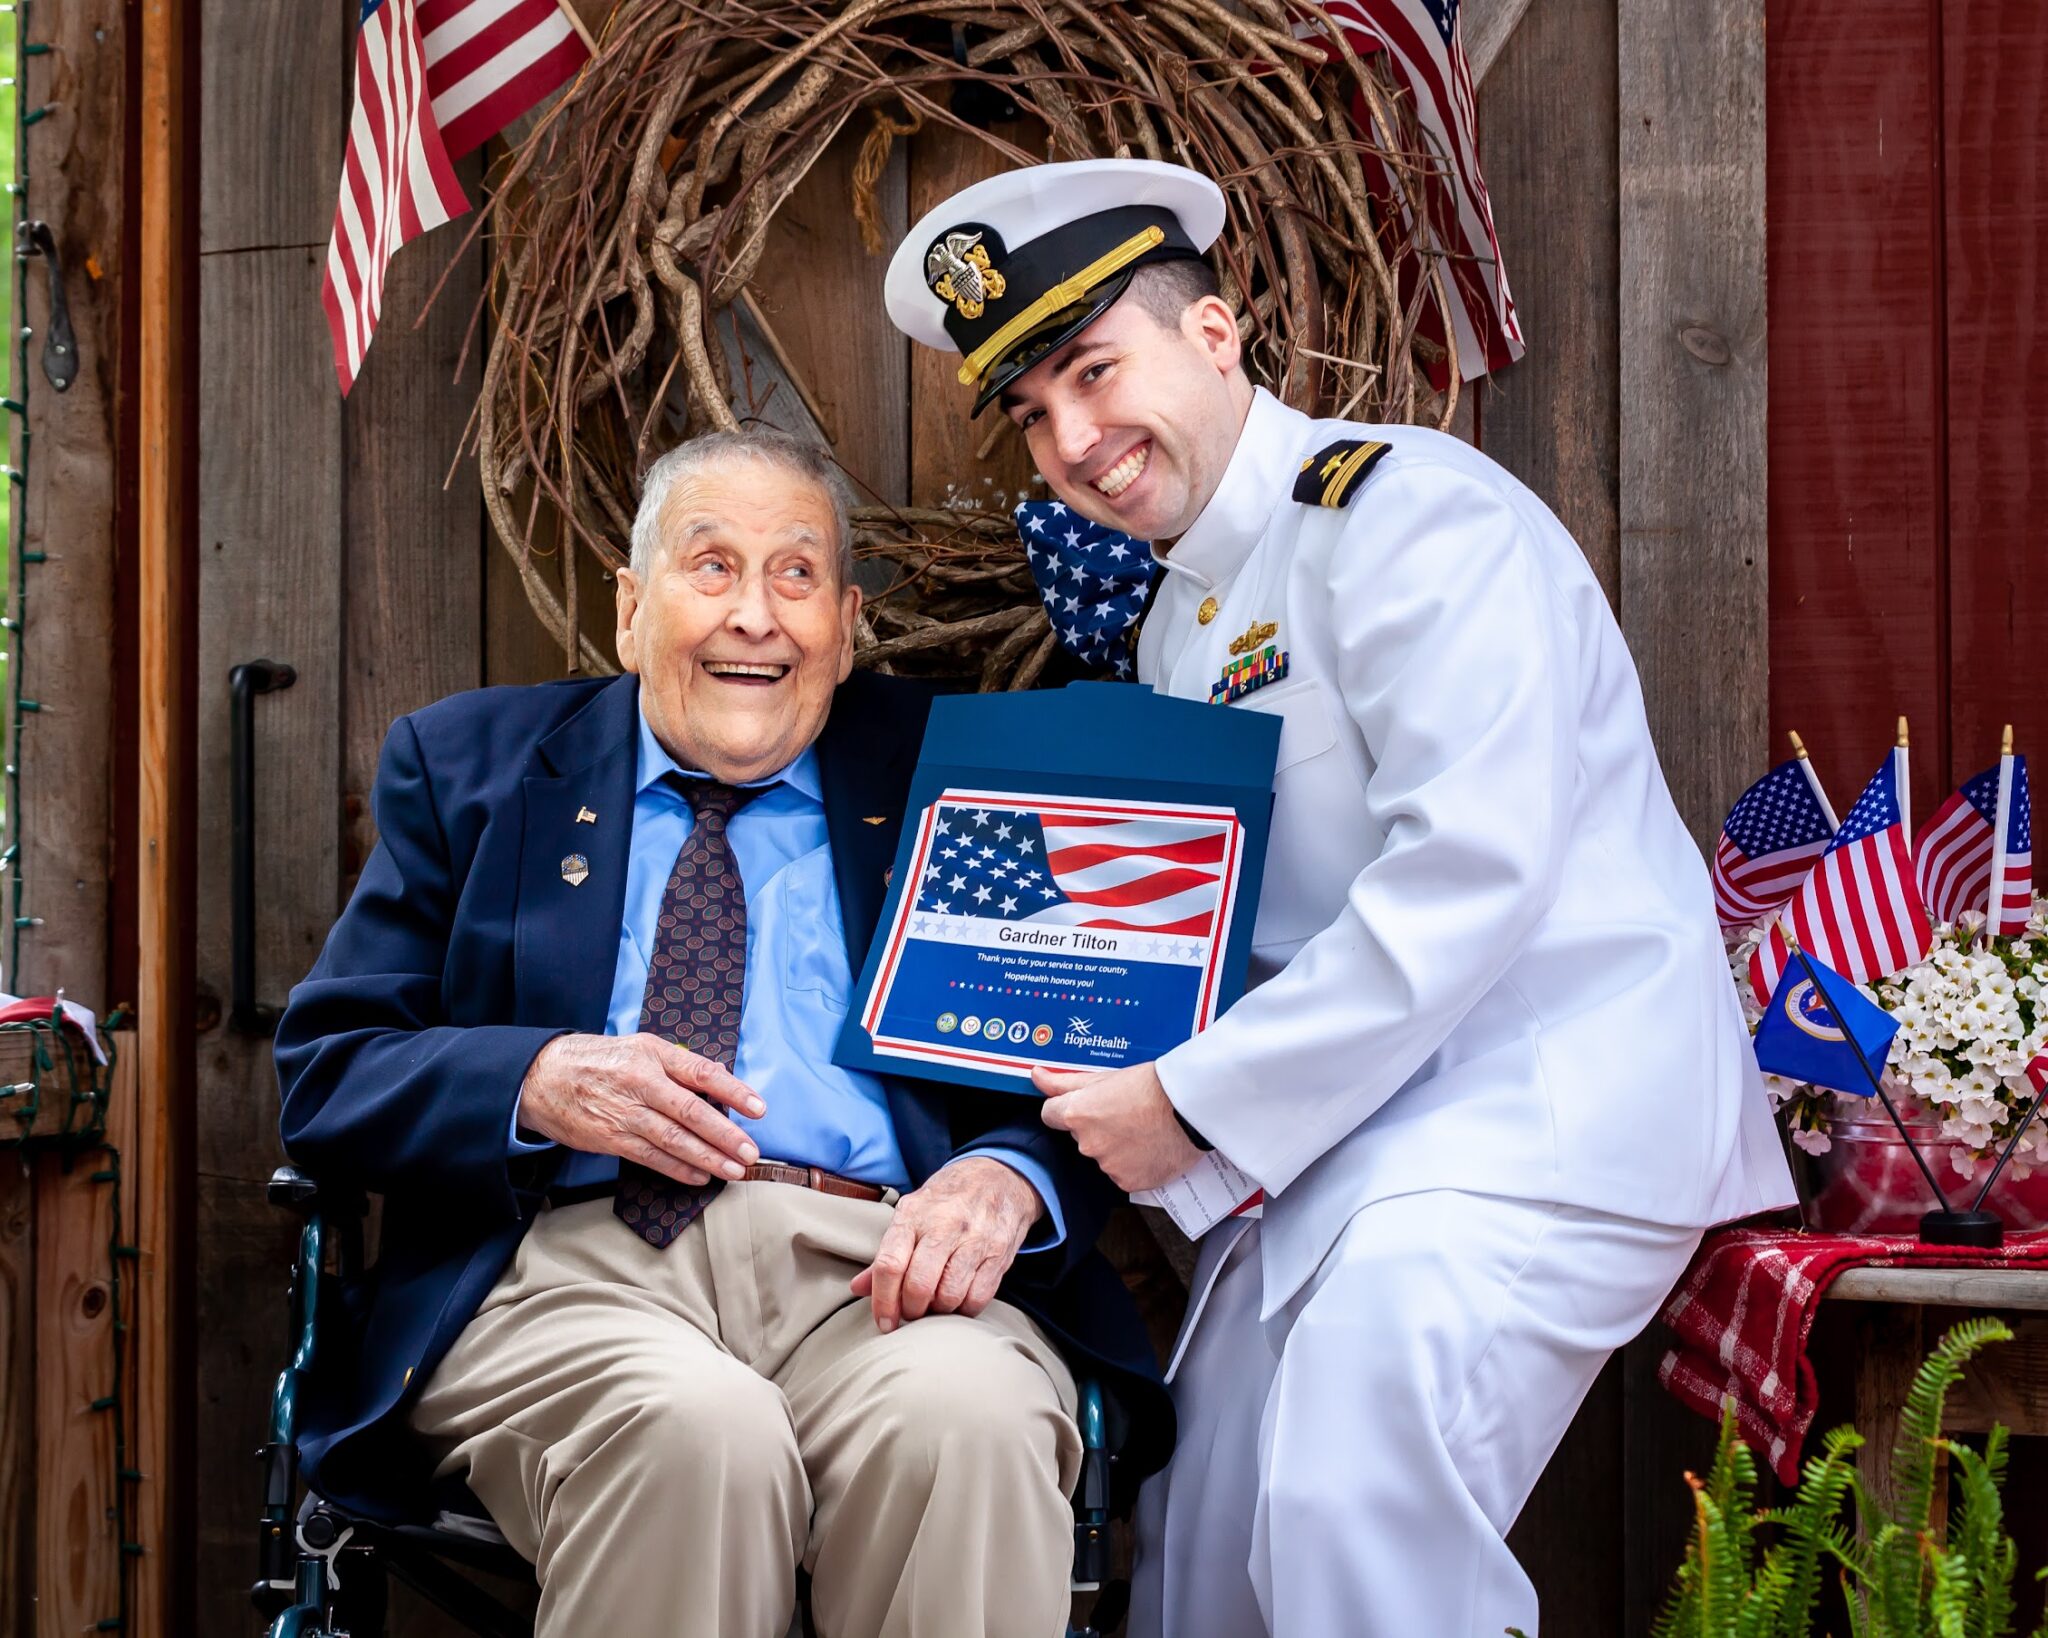 Major Gardner Tilton sits in his wheelchair in front of a patriotic flag wearing a navy blue suit jacket while receiving his pinning ceremony certificate from a HopeHealth volunteer in full navy uniform